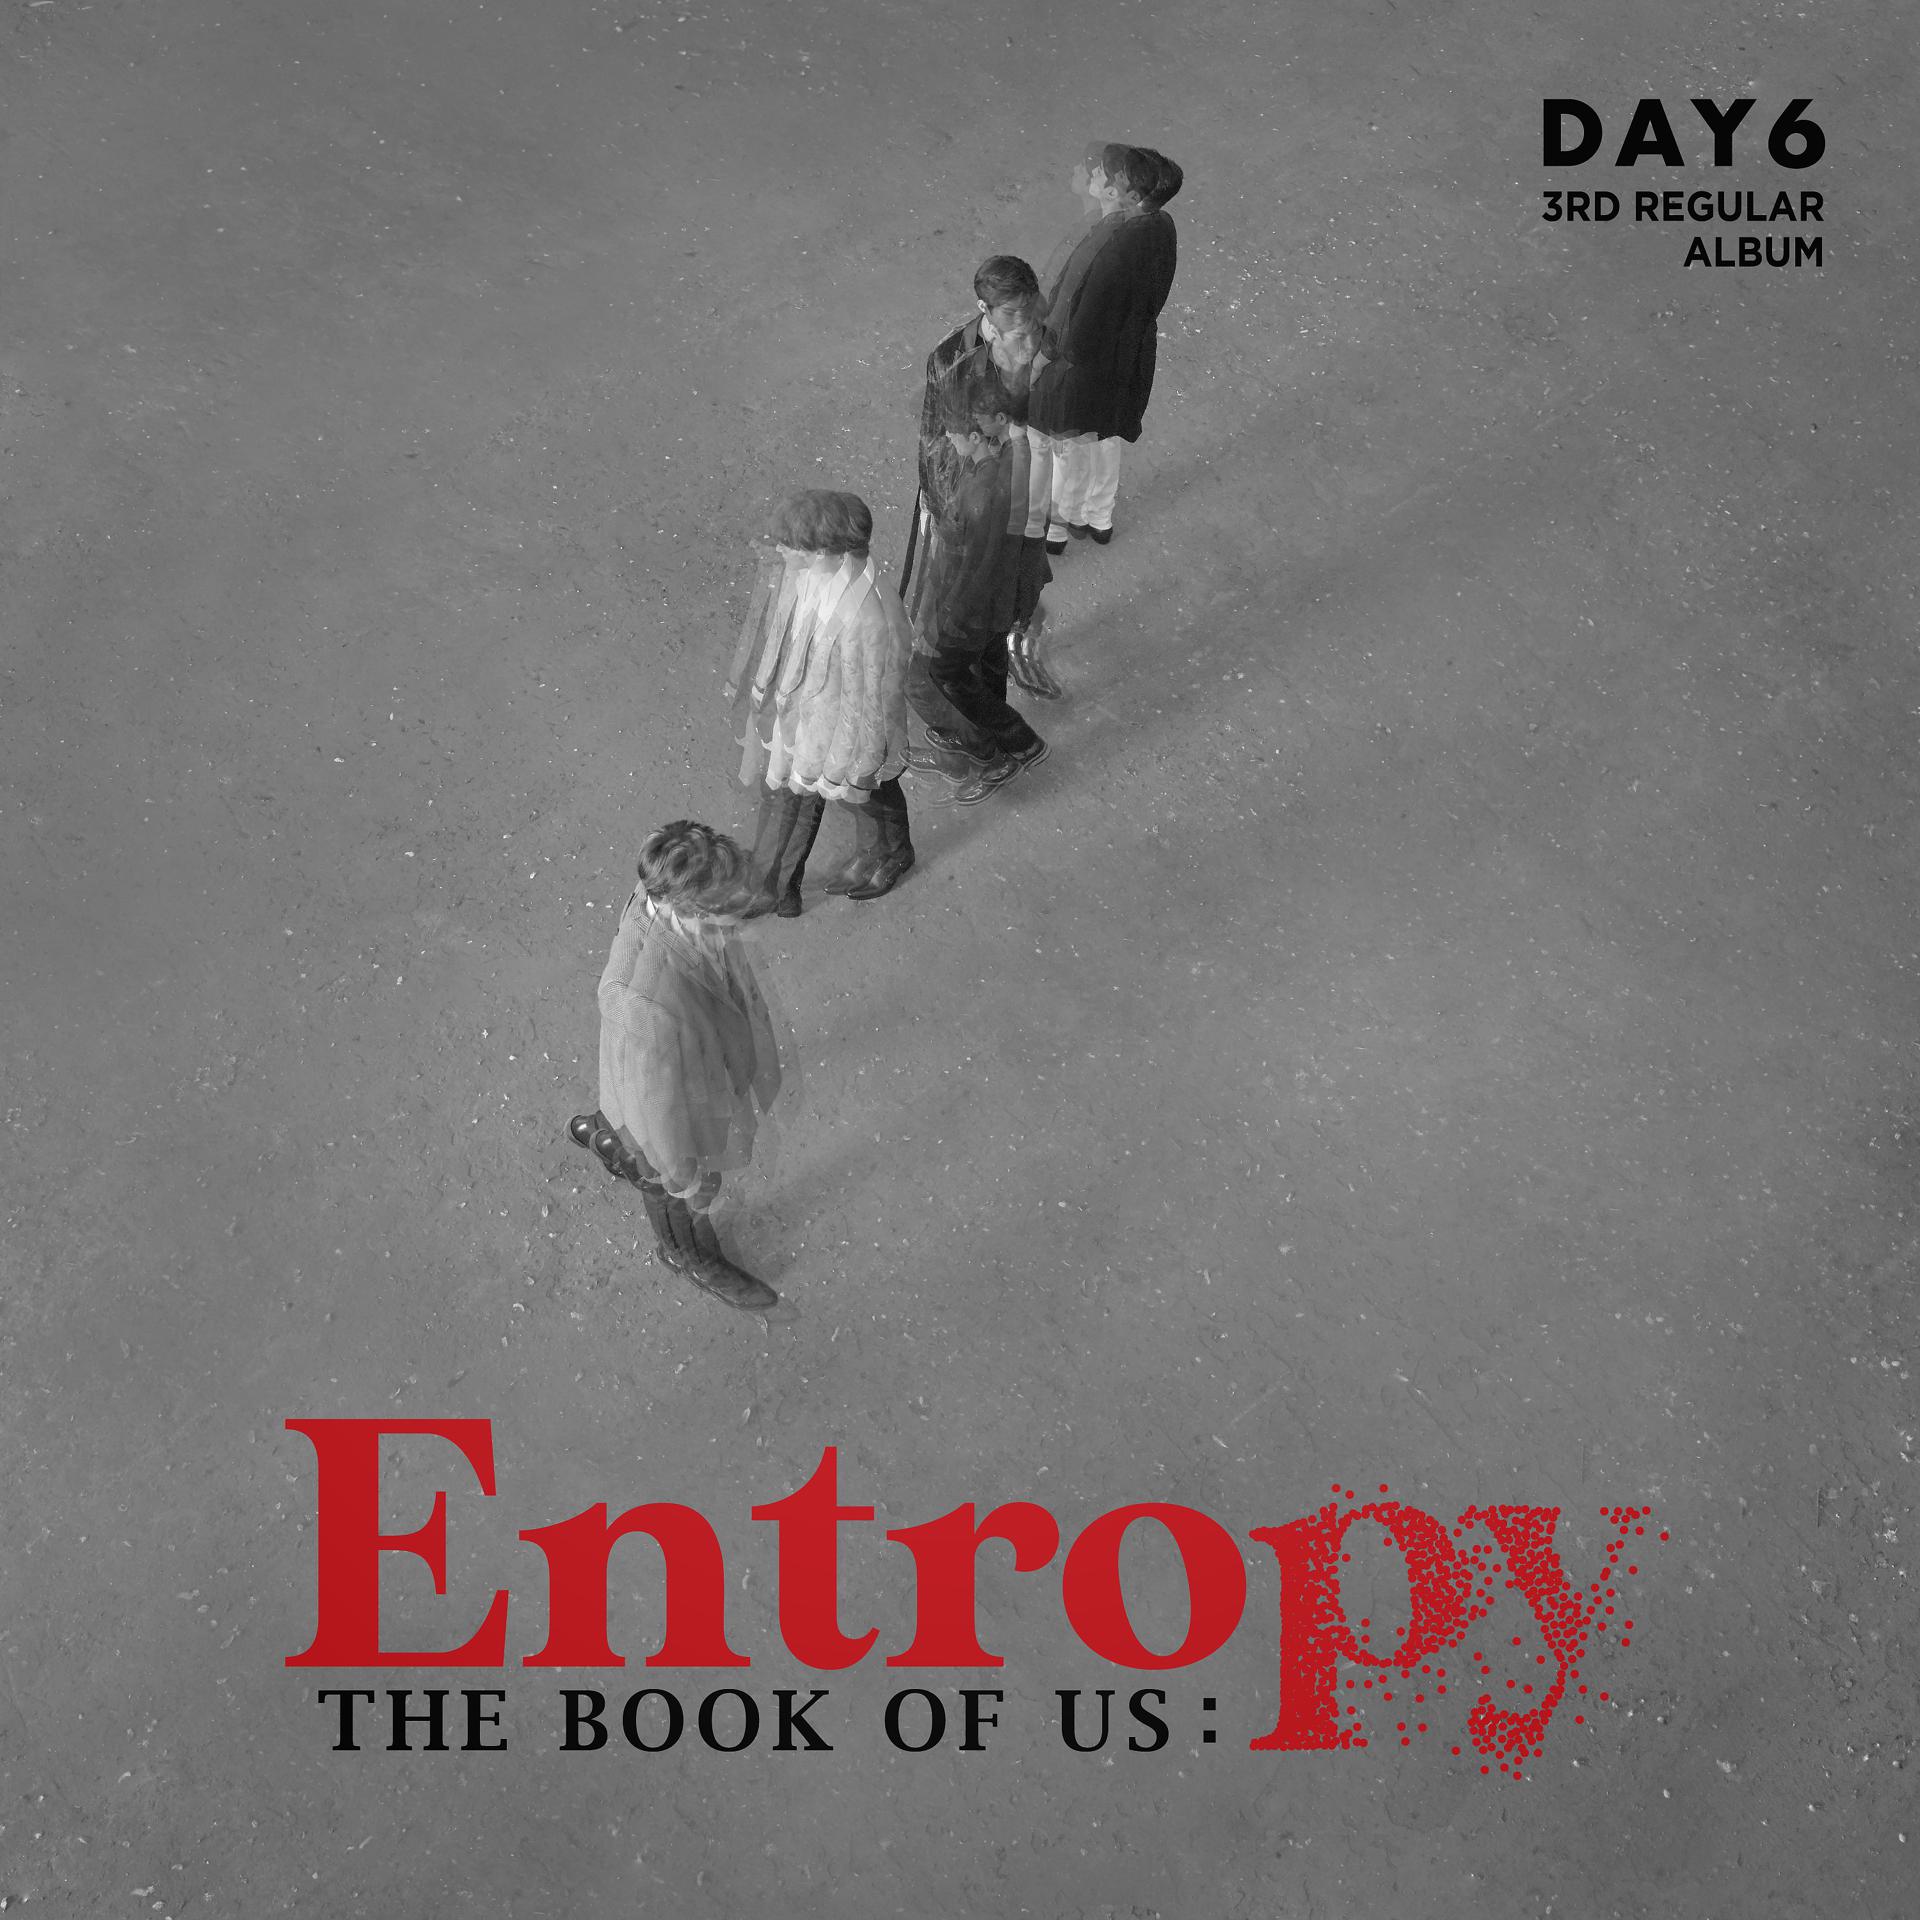 Cover day6. Day6 альбомы. Day6 the book of us Entropy. Альбом day6 Demon. Day6 Entropy album.